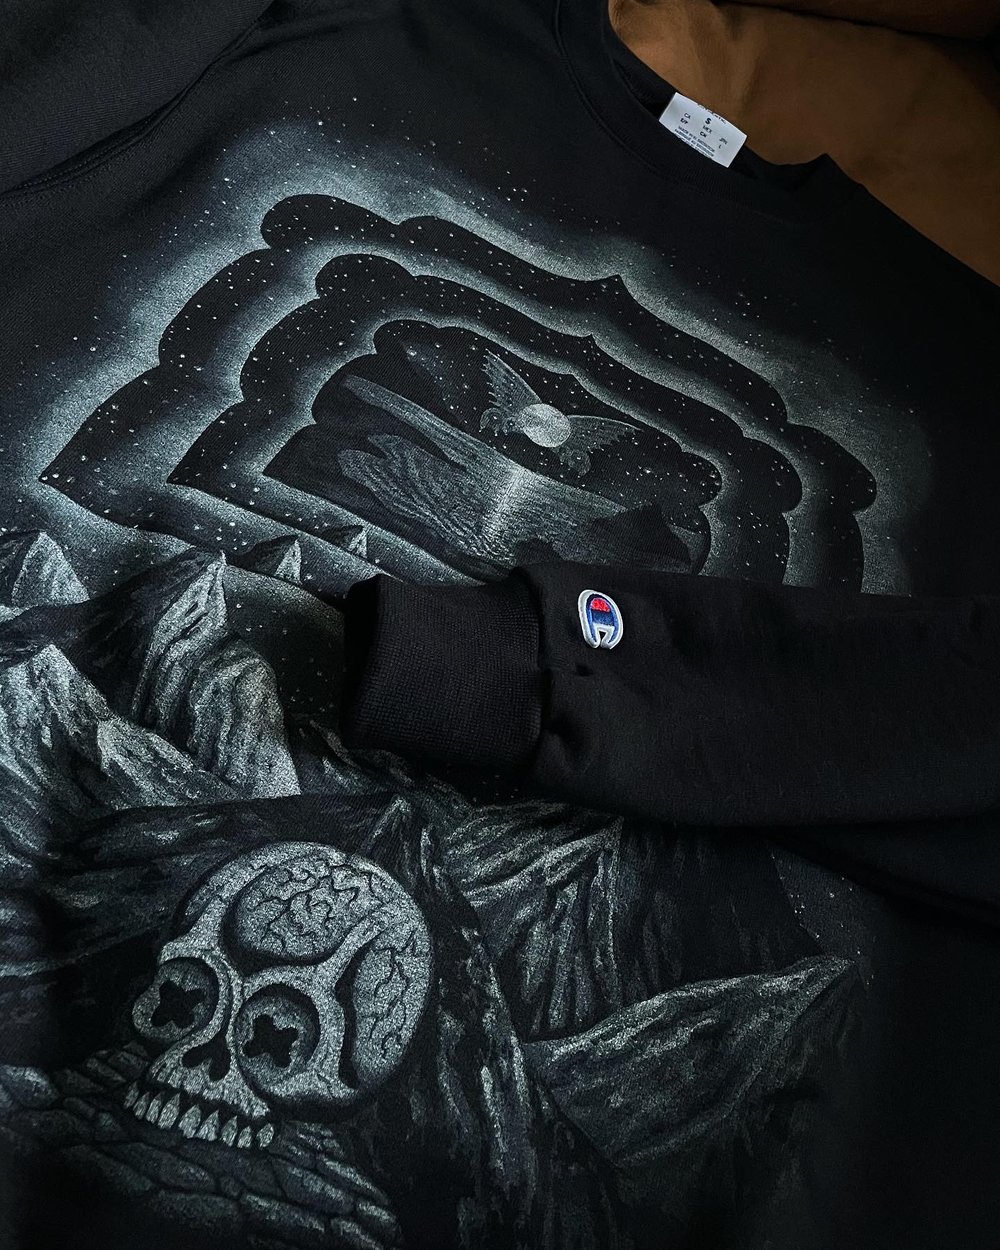 "Call Of The Void" Crewneck